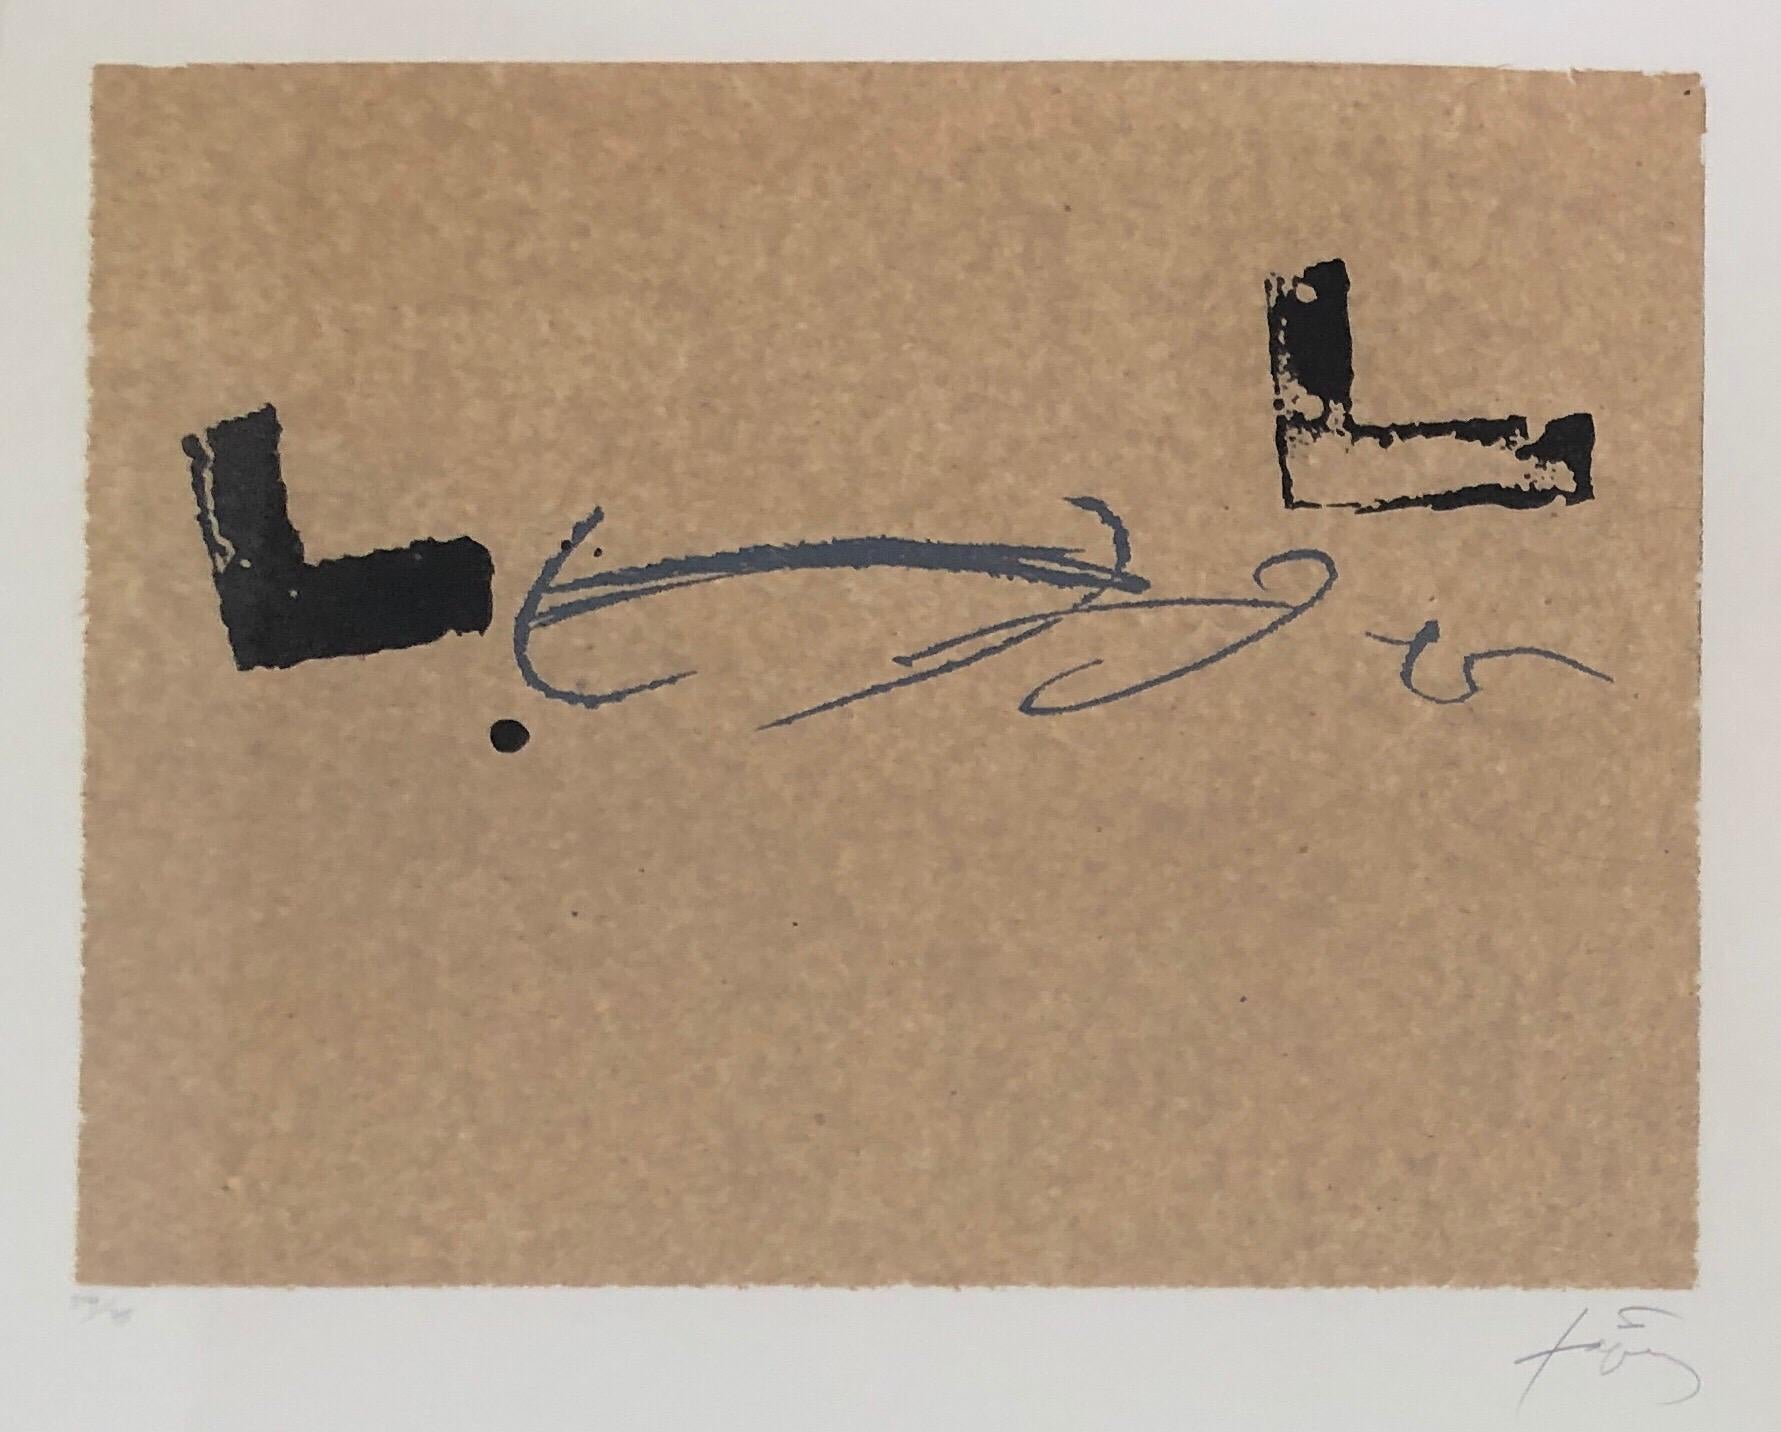 Size includes frame. There is a plate impression at the image that leads me to believe this is an aquatint.

Antoni Tàpies i Puig, 1st Marquis of Tàpies (Catalan: 13 December 1923 – 6 February 2012) was a Spanish painter, sculptor and art theorist,